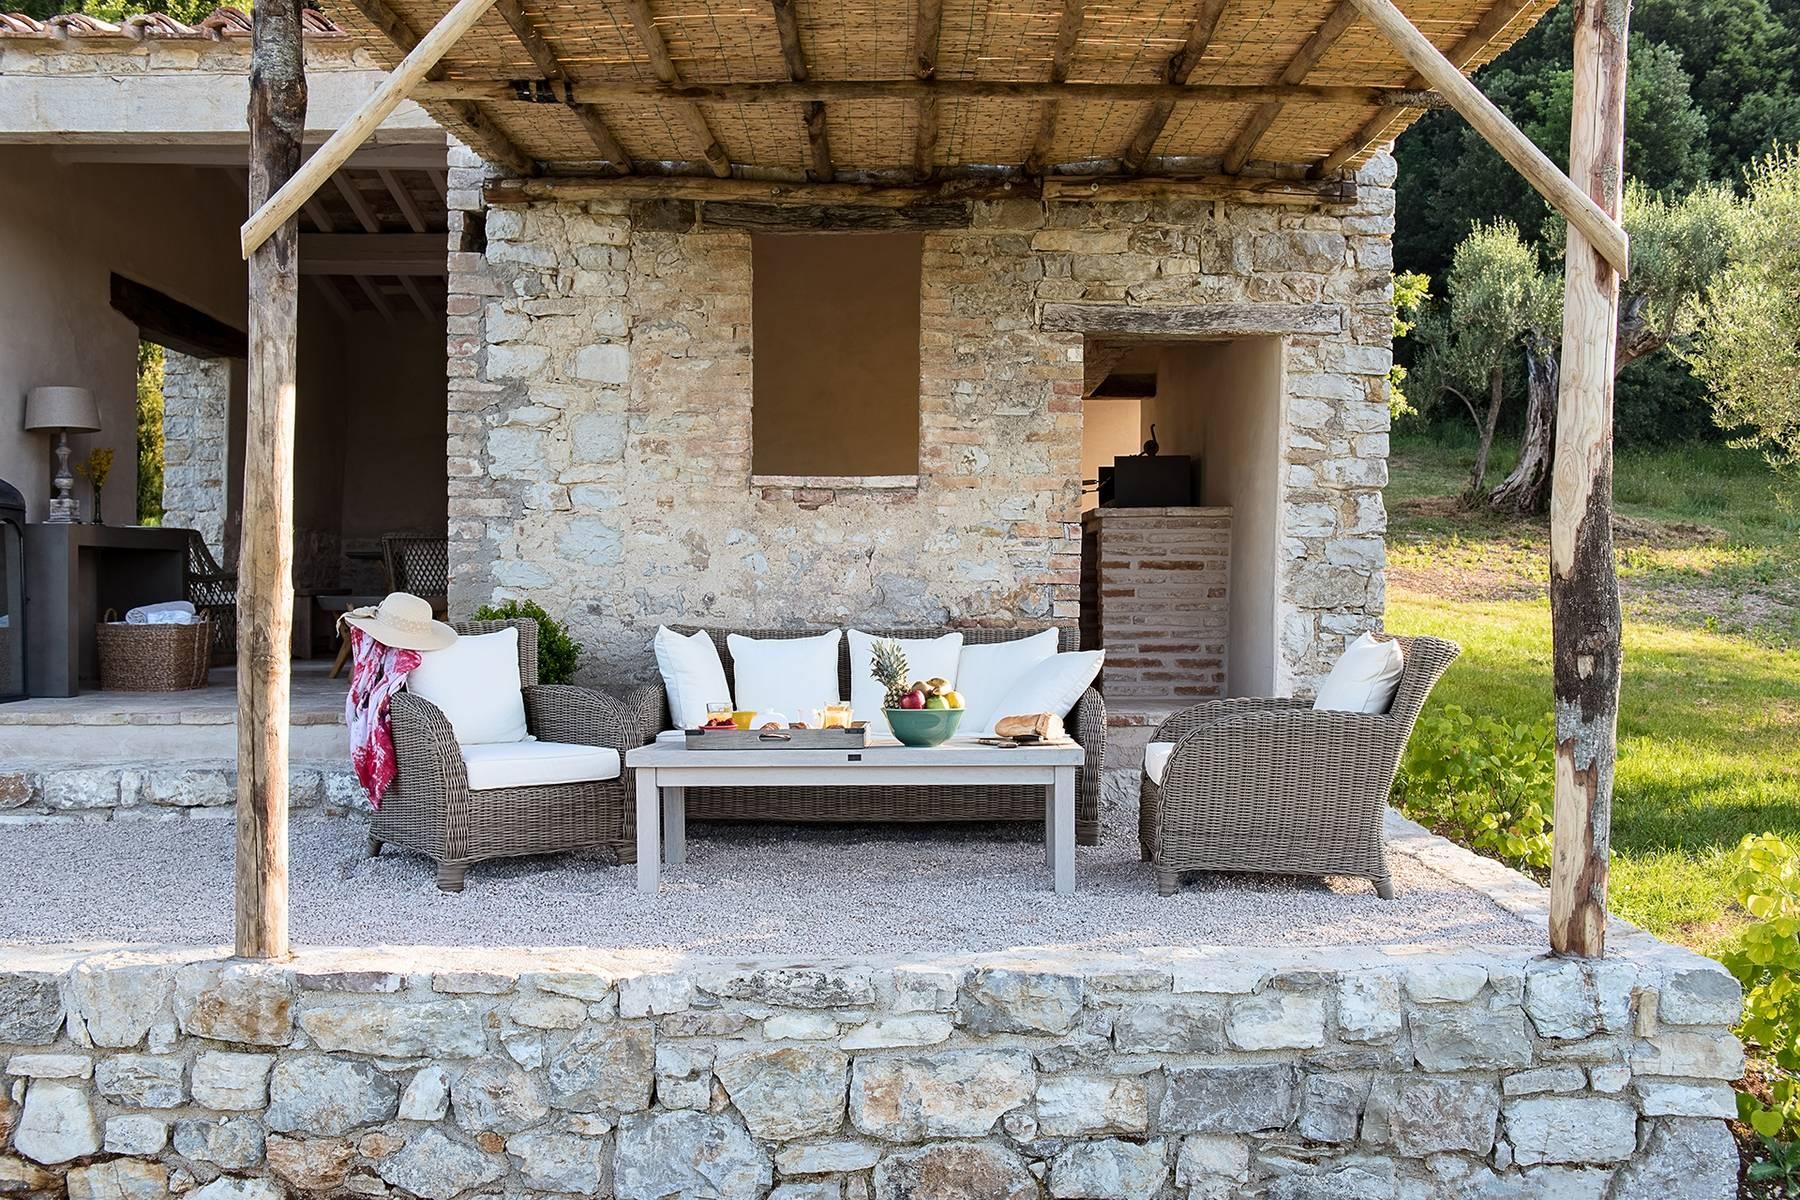 Complete privacy and luxury amidst the picturesque Umbrian countryside - 13